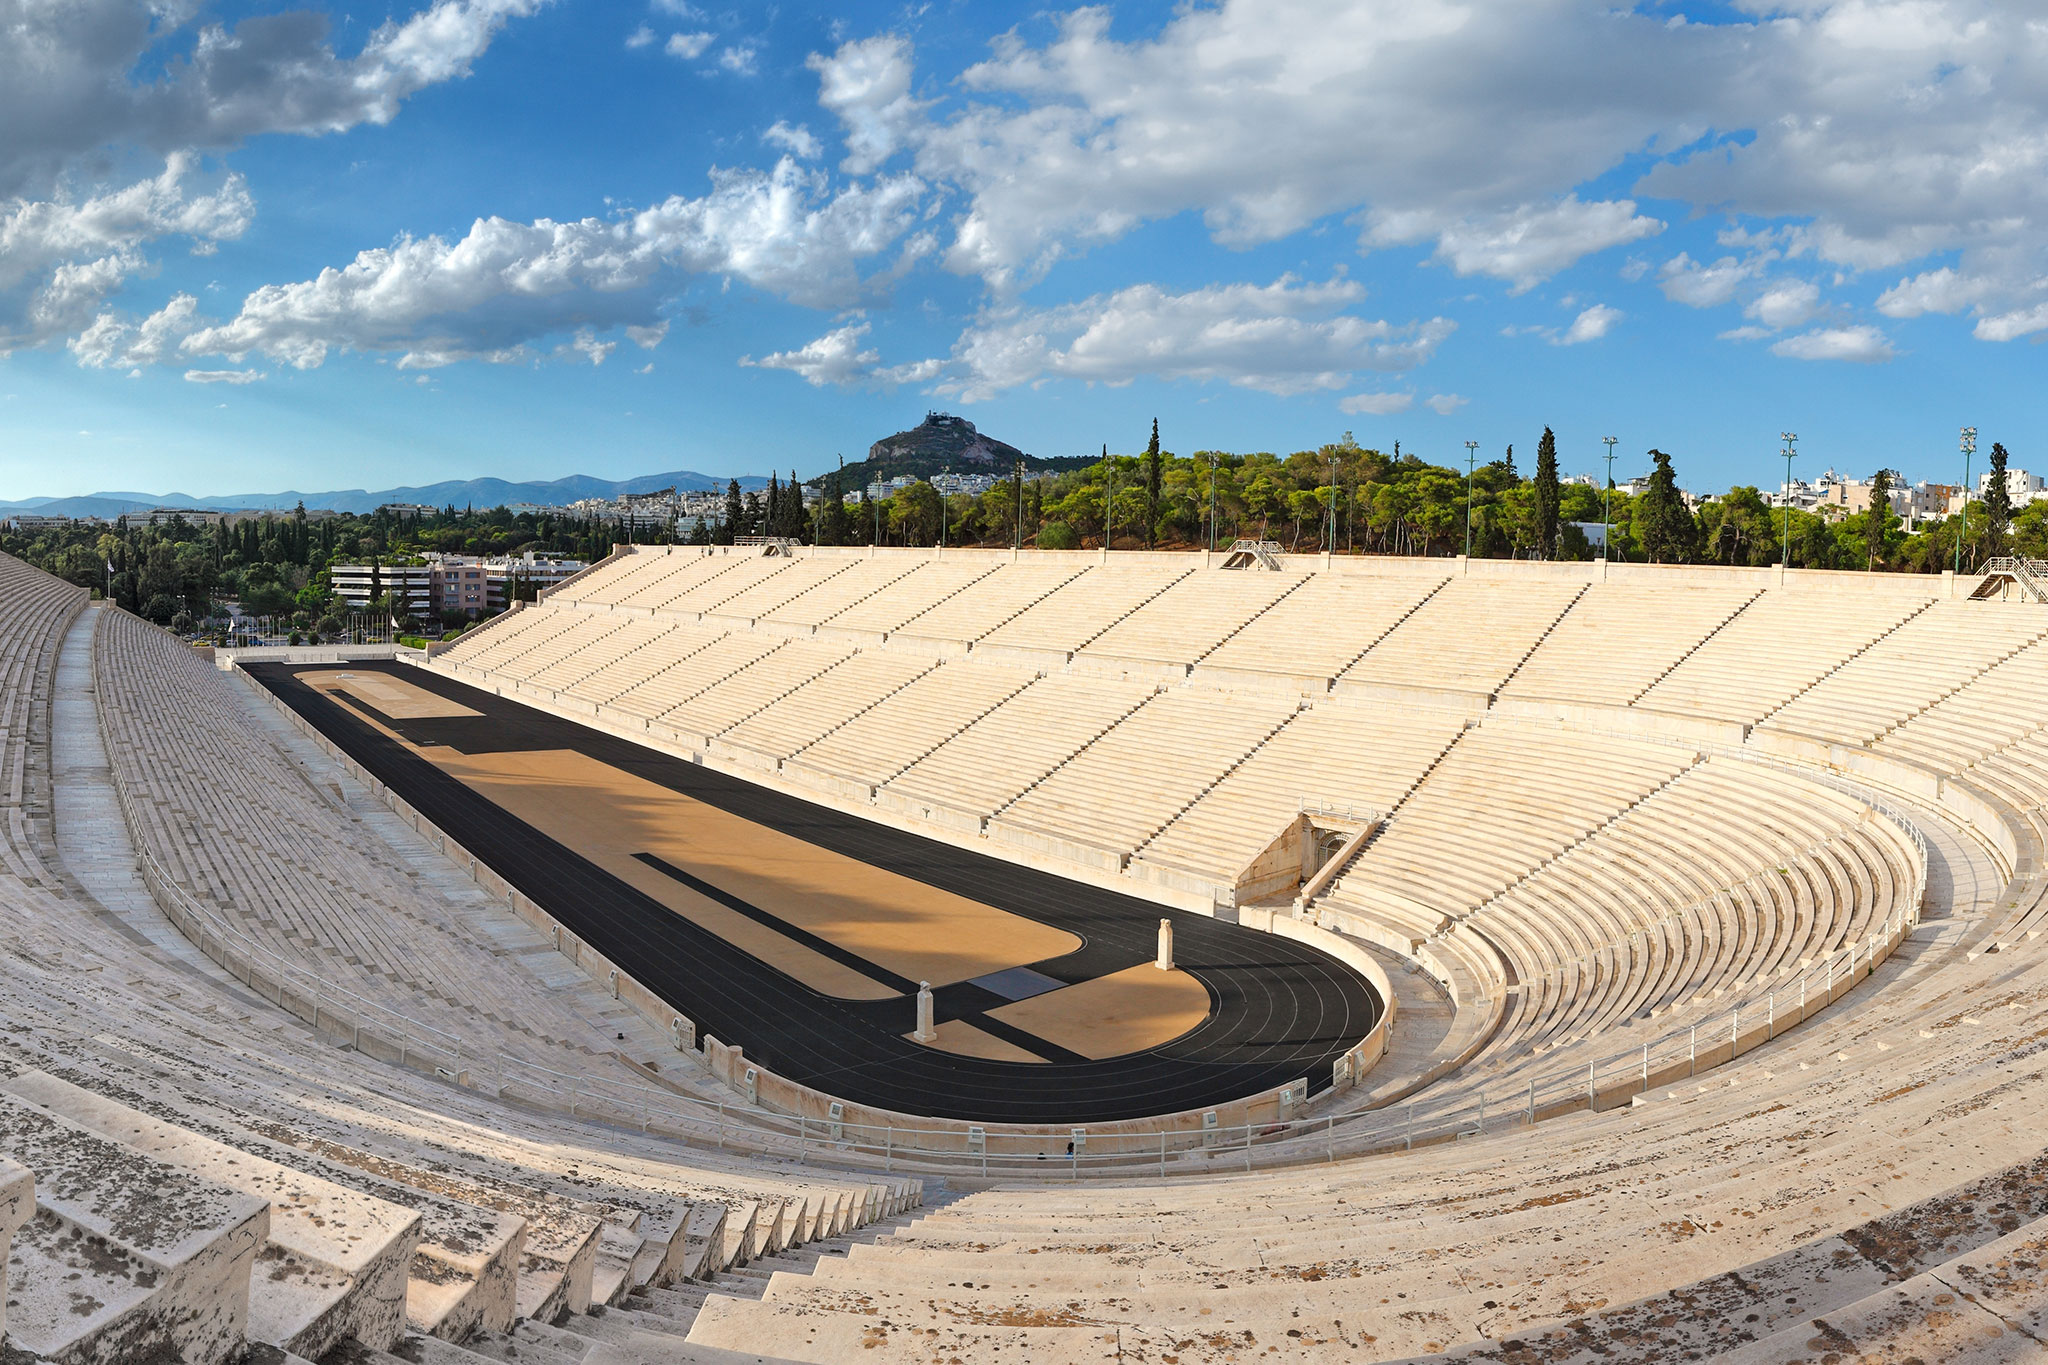 Wide-angle view of the Panathenaic Stadium in Athens, with its distinctive U-shape structure of white marble seats and a black running track under clear blue skies.